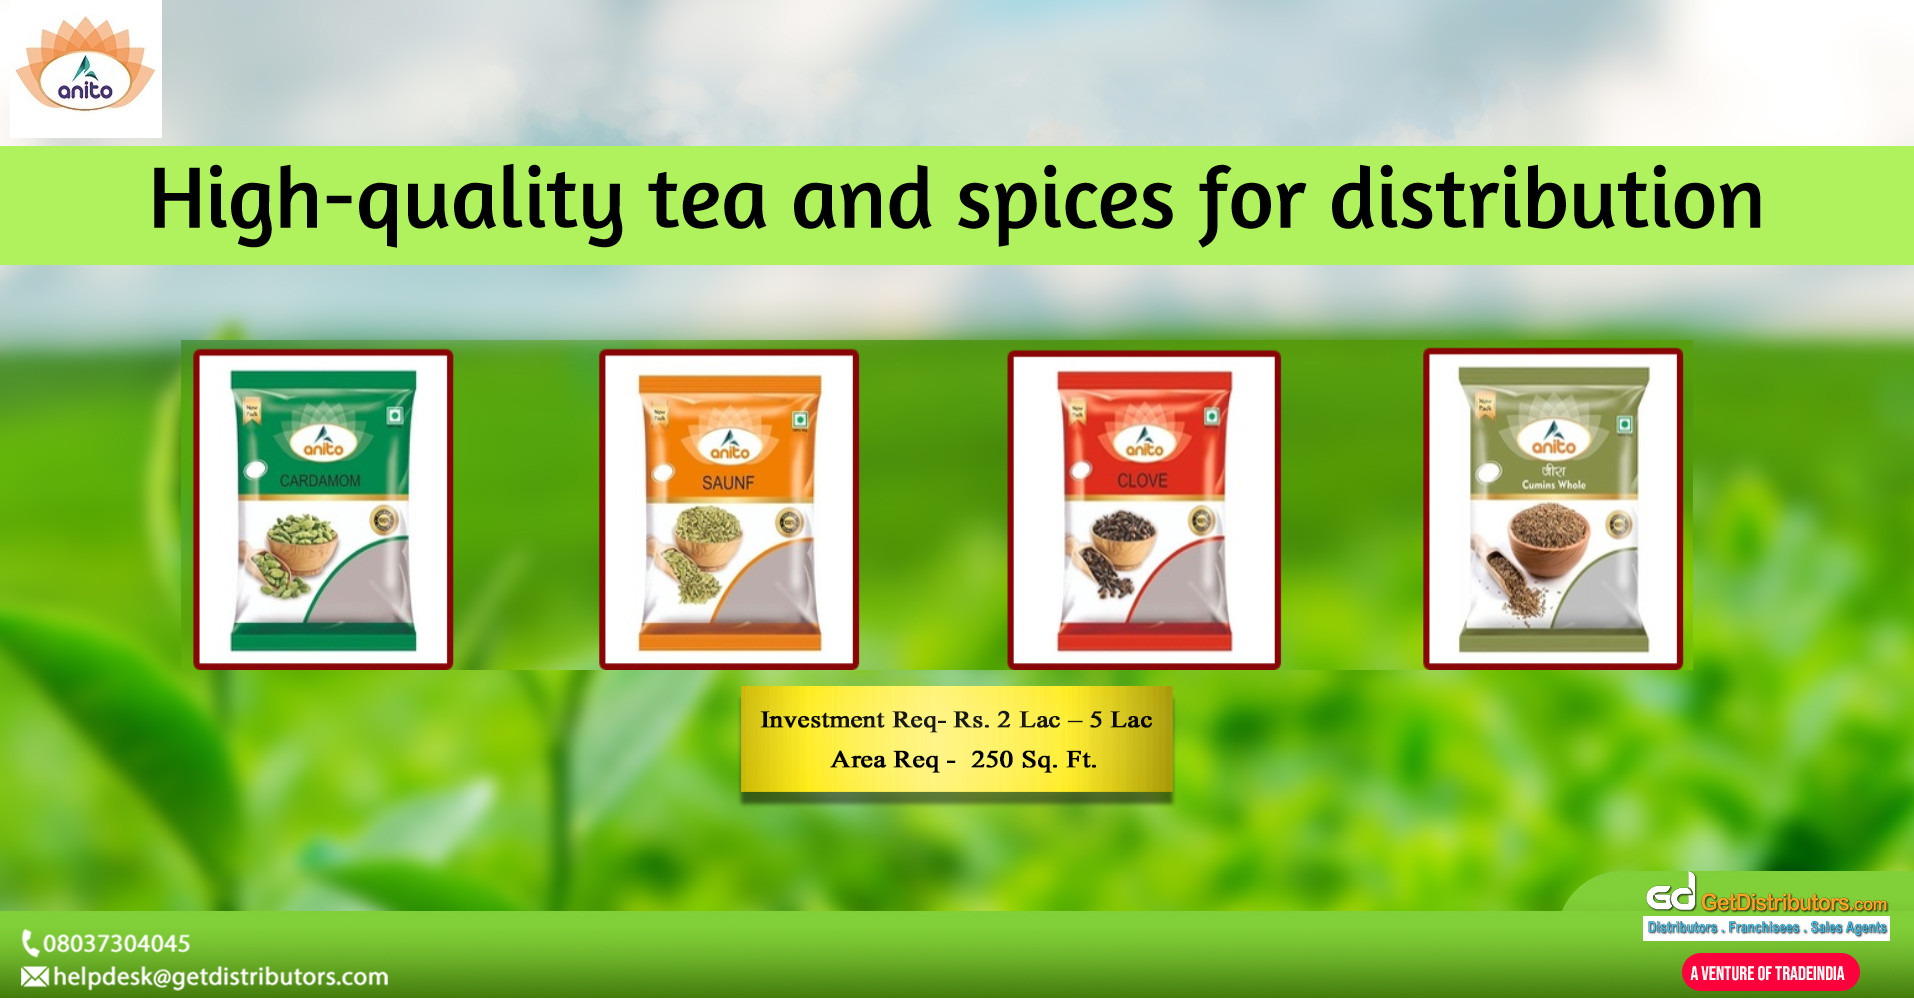 High-quality tea and spices for distribution